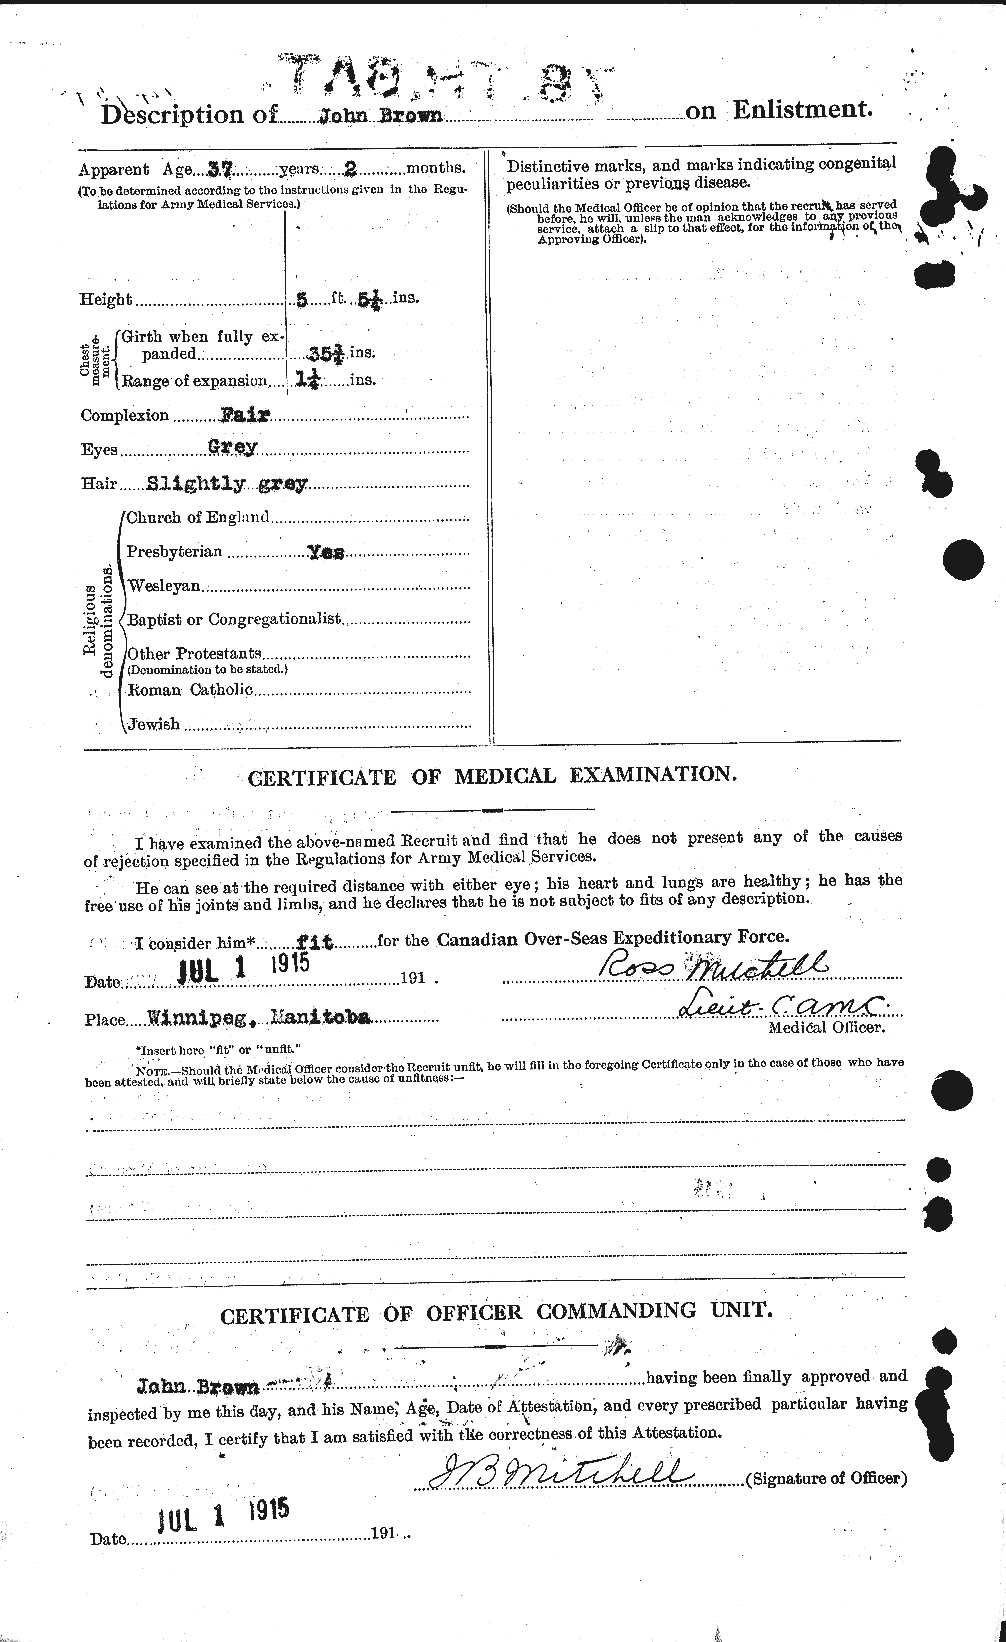 Personnel Records of the First World War - CEF 263919b